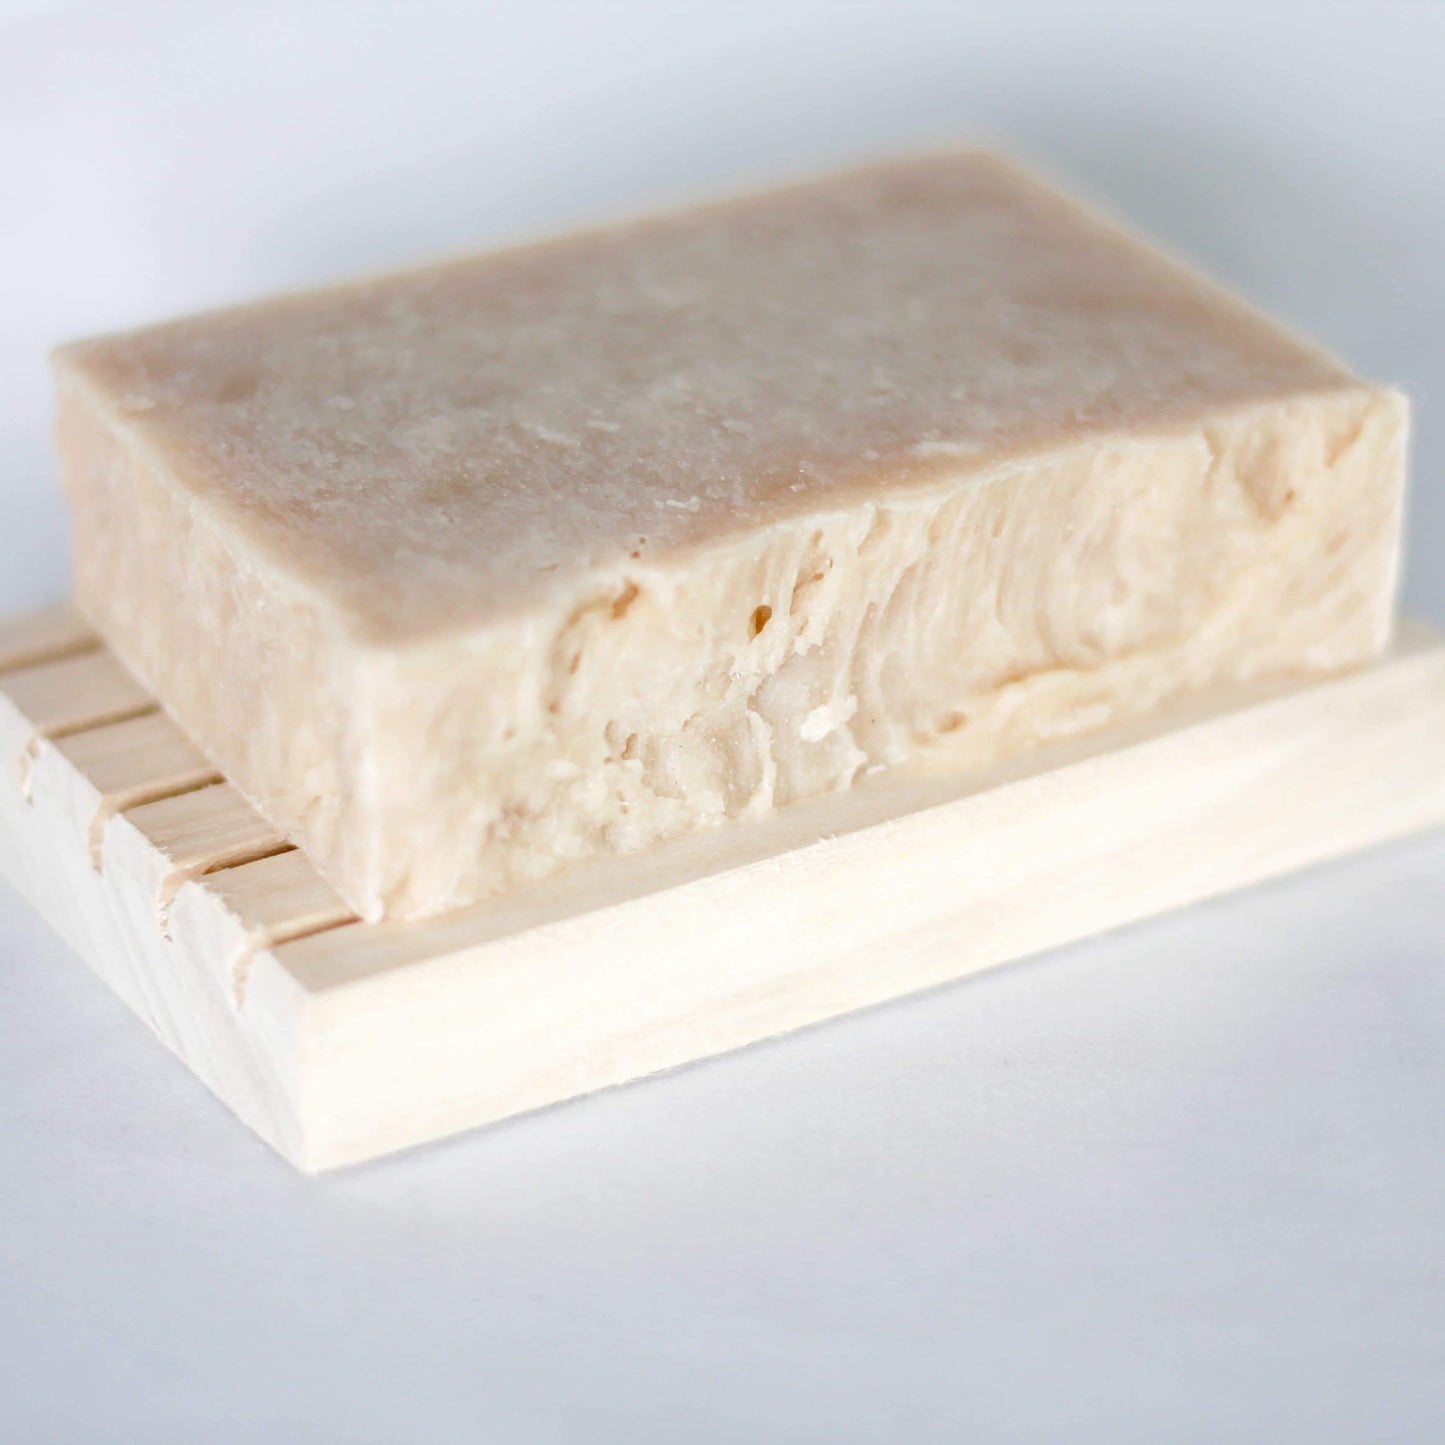 Cream soap bar on top of a wooden soap holder with a white background.